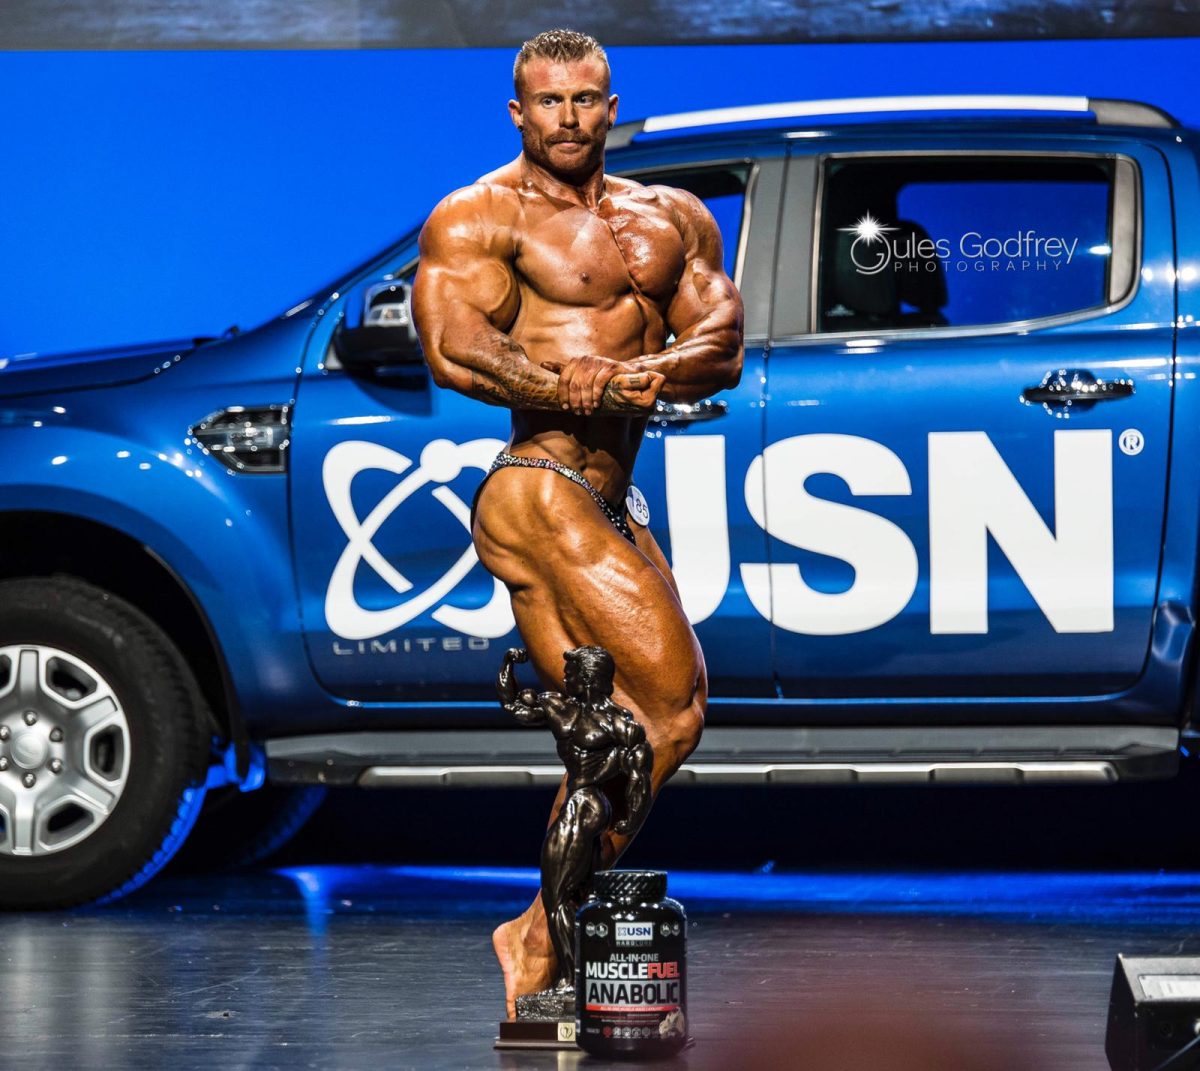 Bodybuilder crowned Mr Universe after ten years competing for title